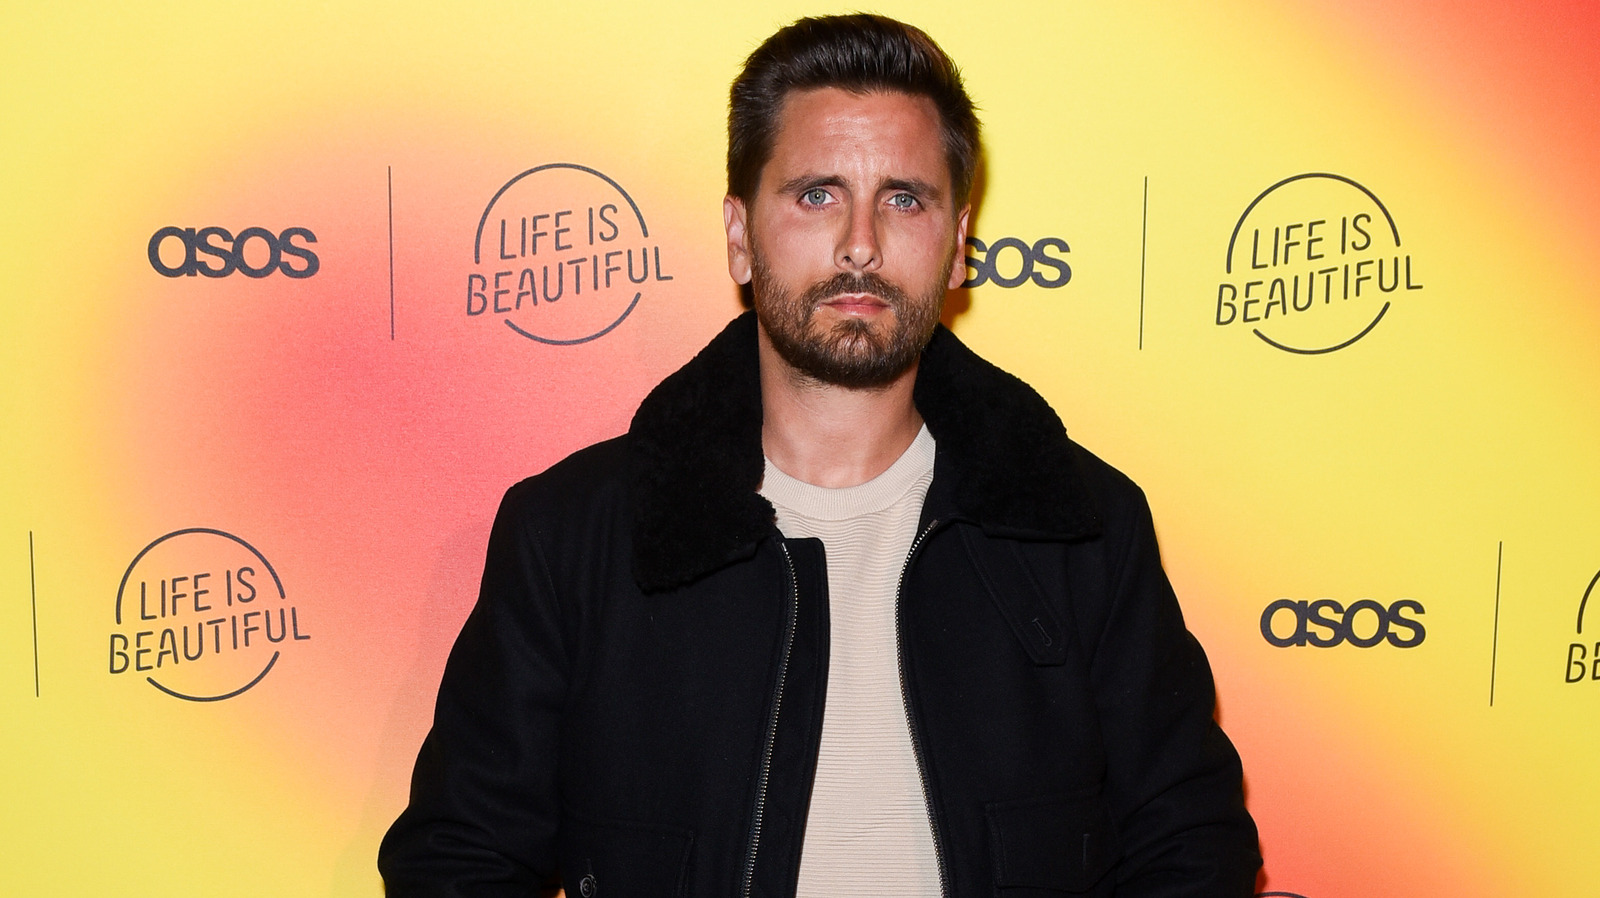 Scott Disick's Unrecognizable Look In New Photo Has Us Doing A Double Take